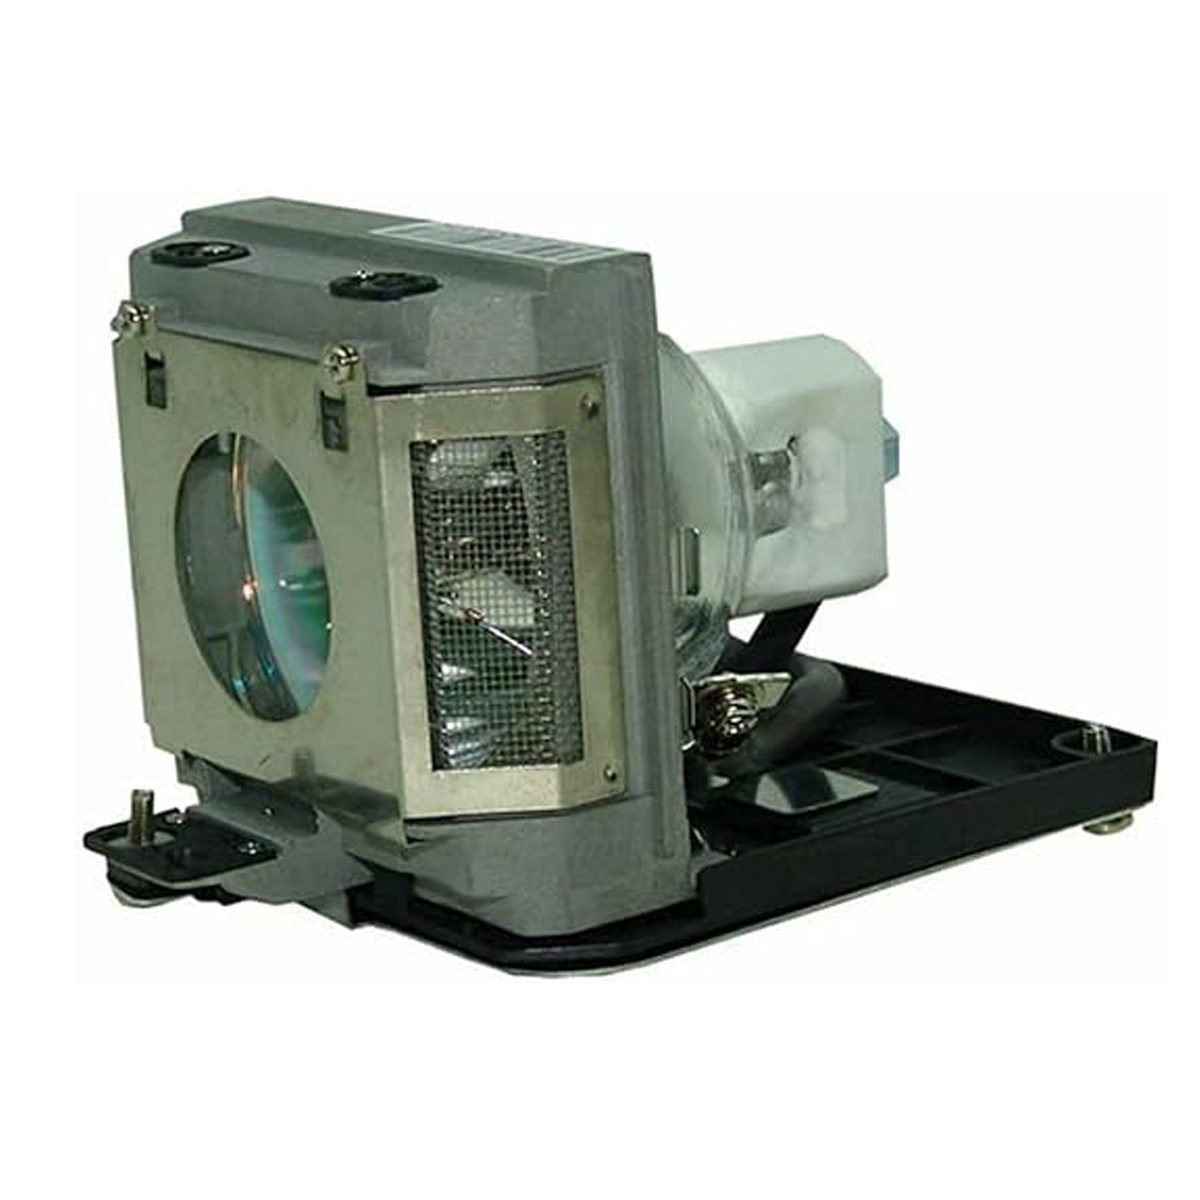 Replacement Projector lamp AH-57201 For EIKI EIP-1500T